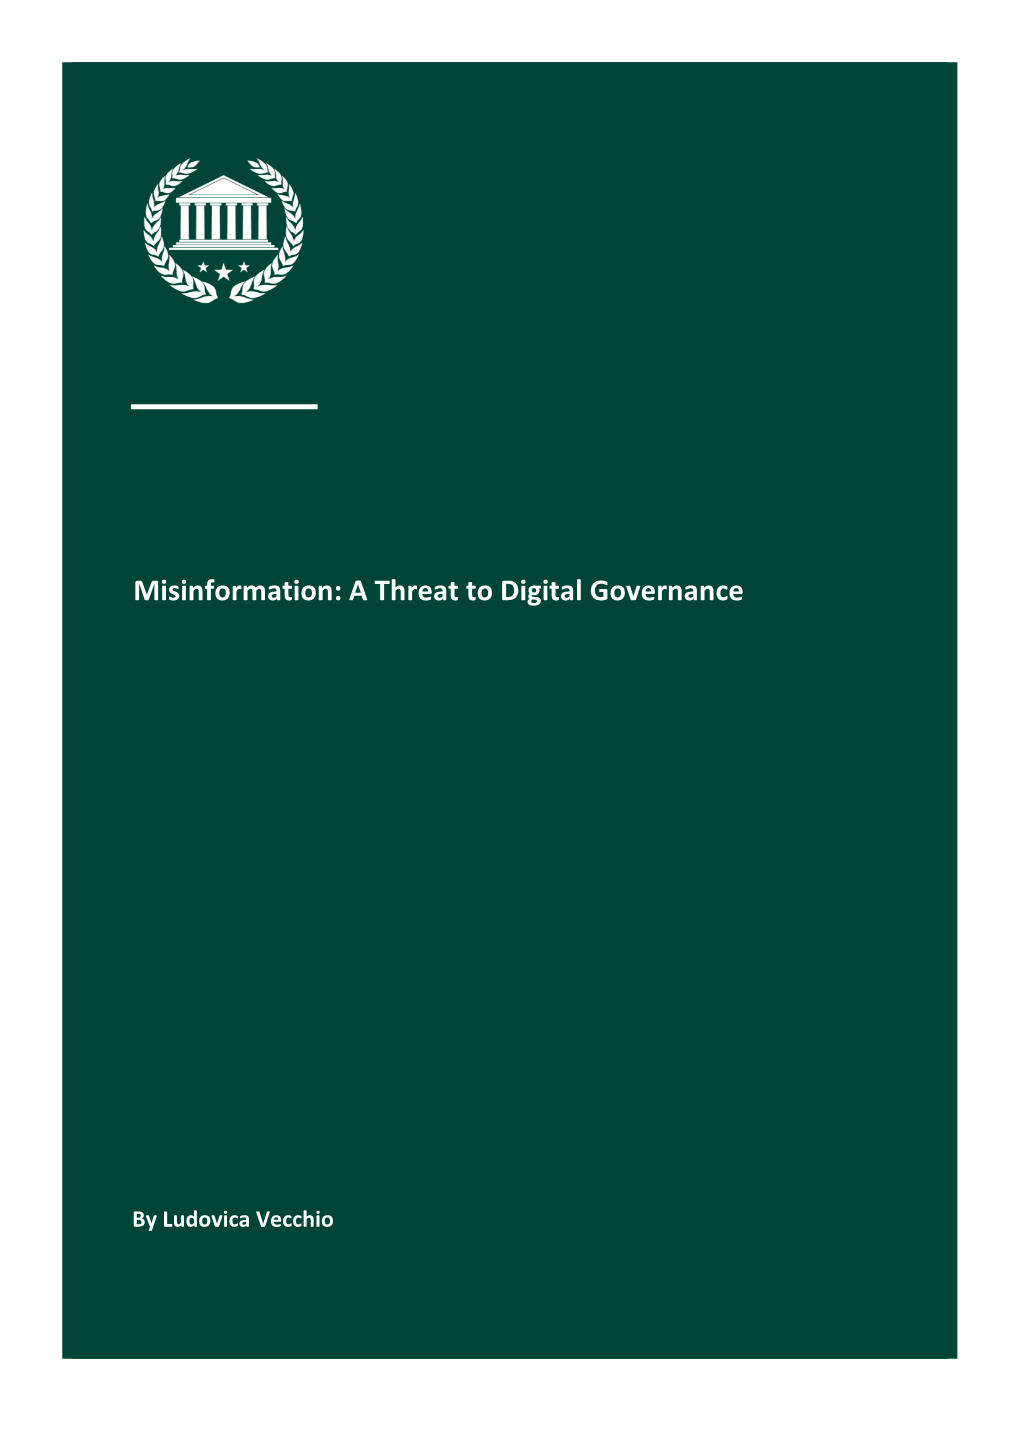 Misinformation: a Threat to Digital Governance